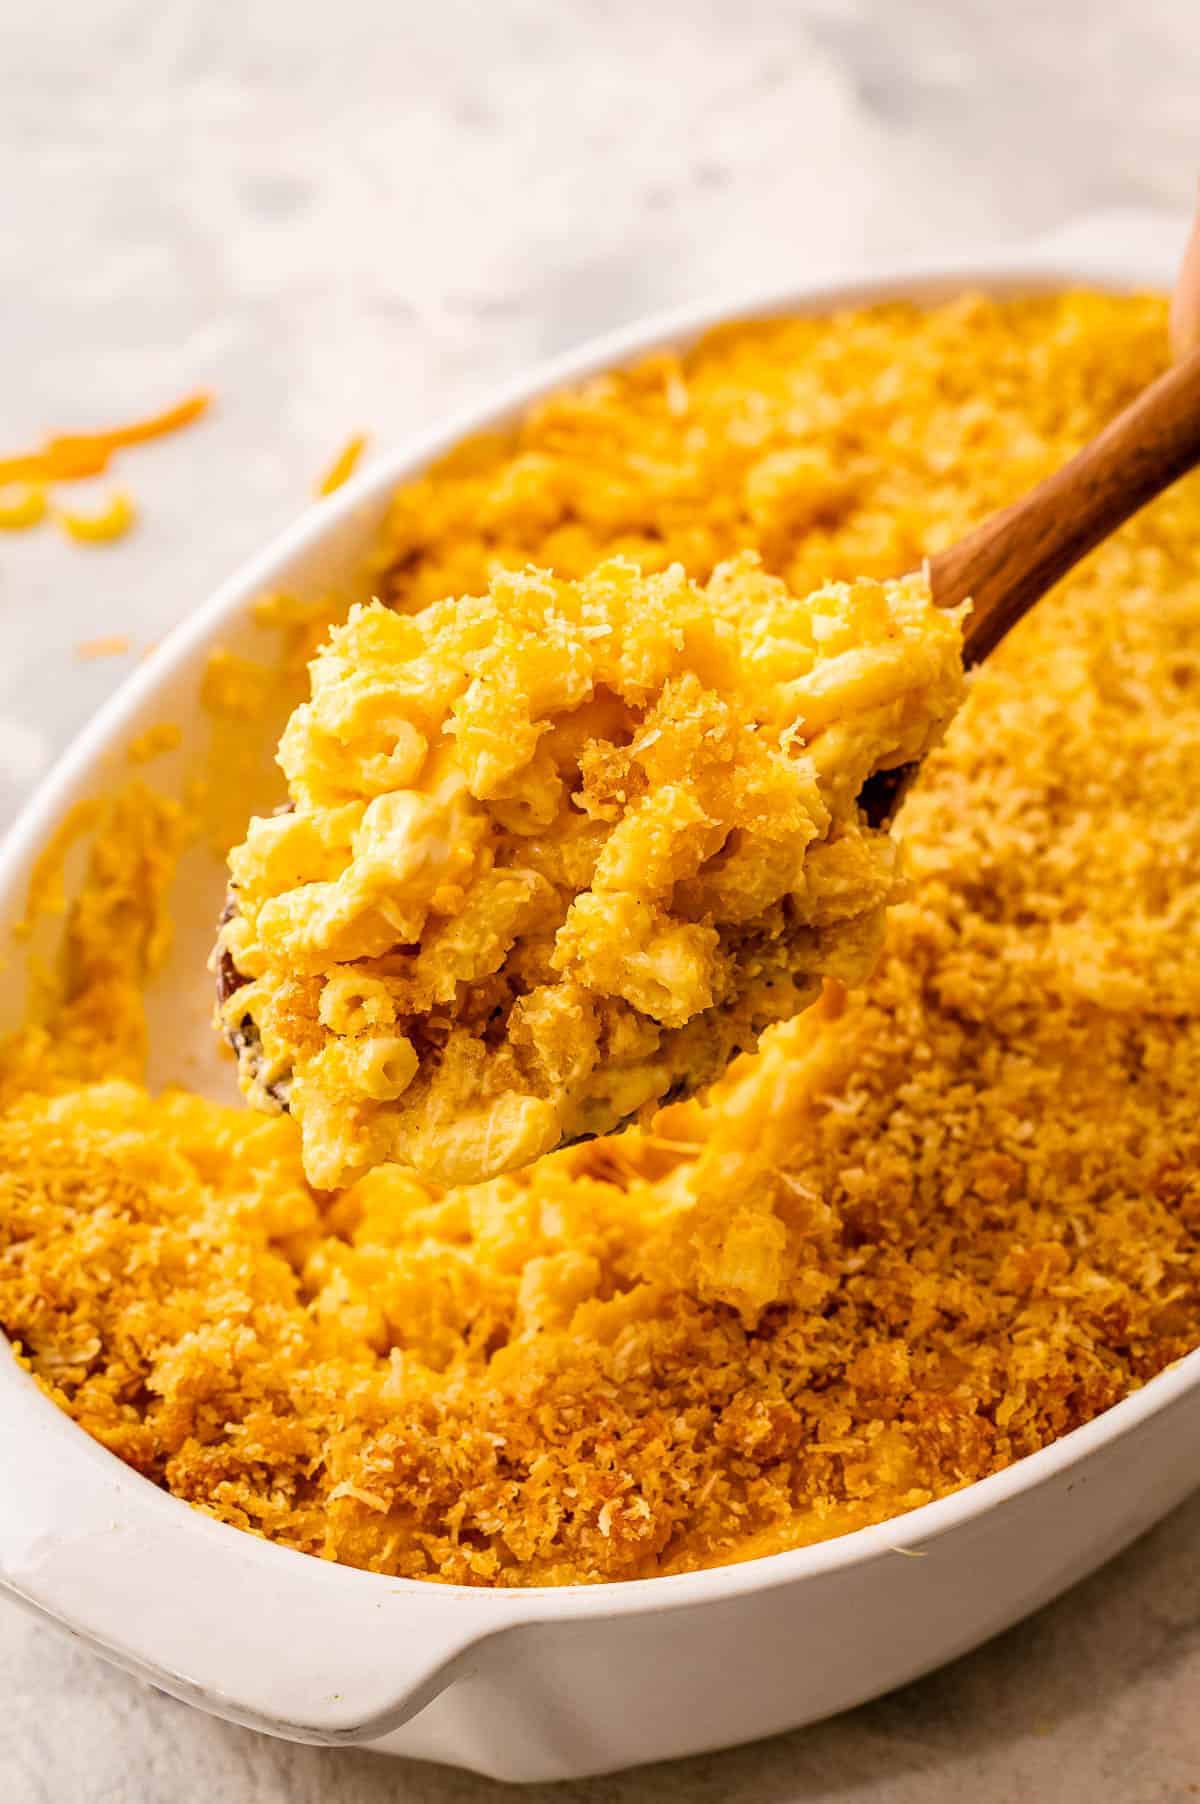 Spoon scooping mac and cheese out of casserole dish